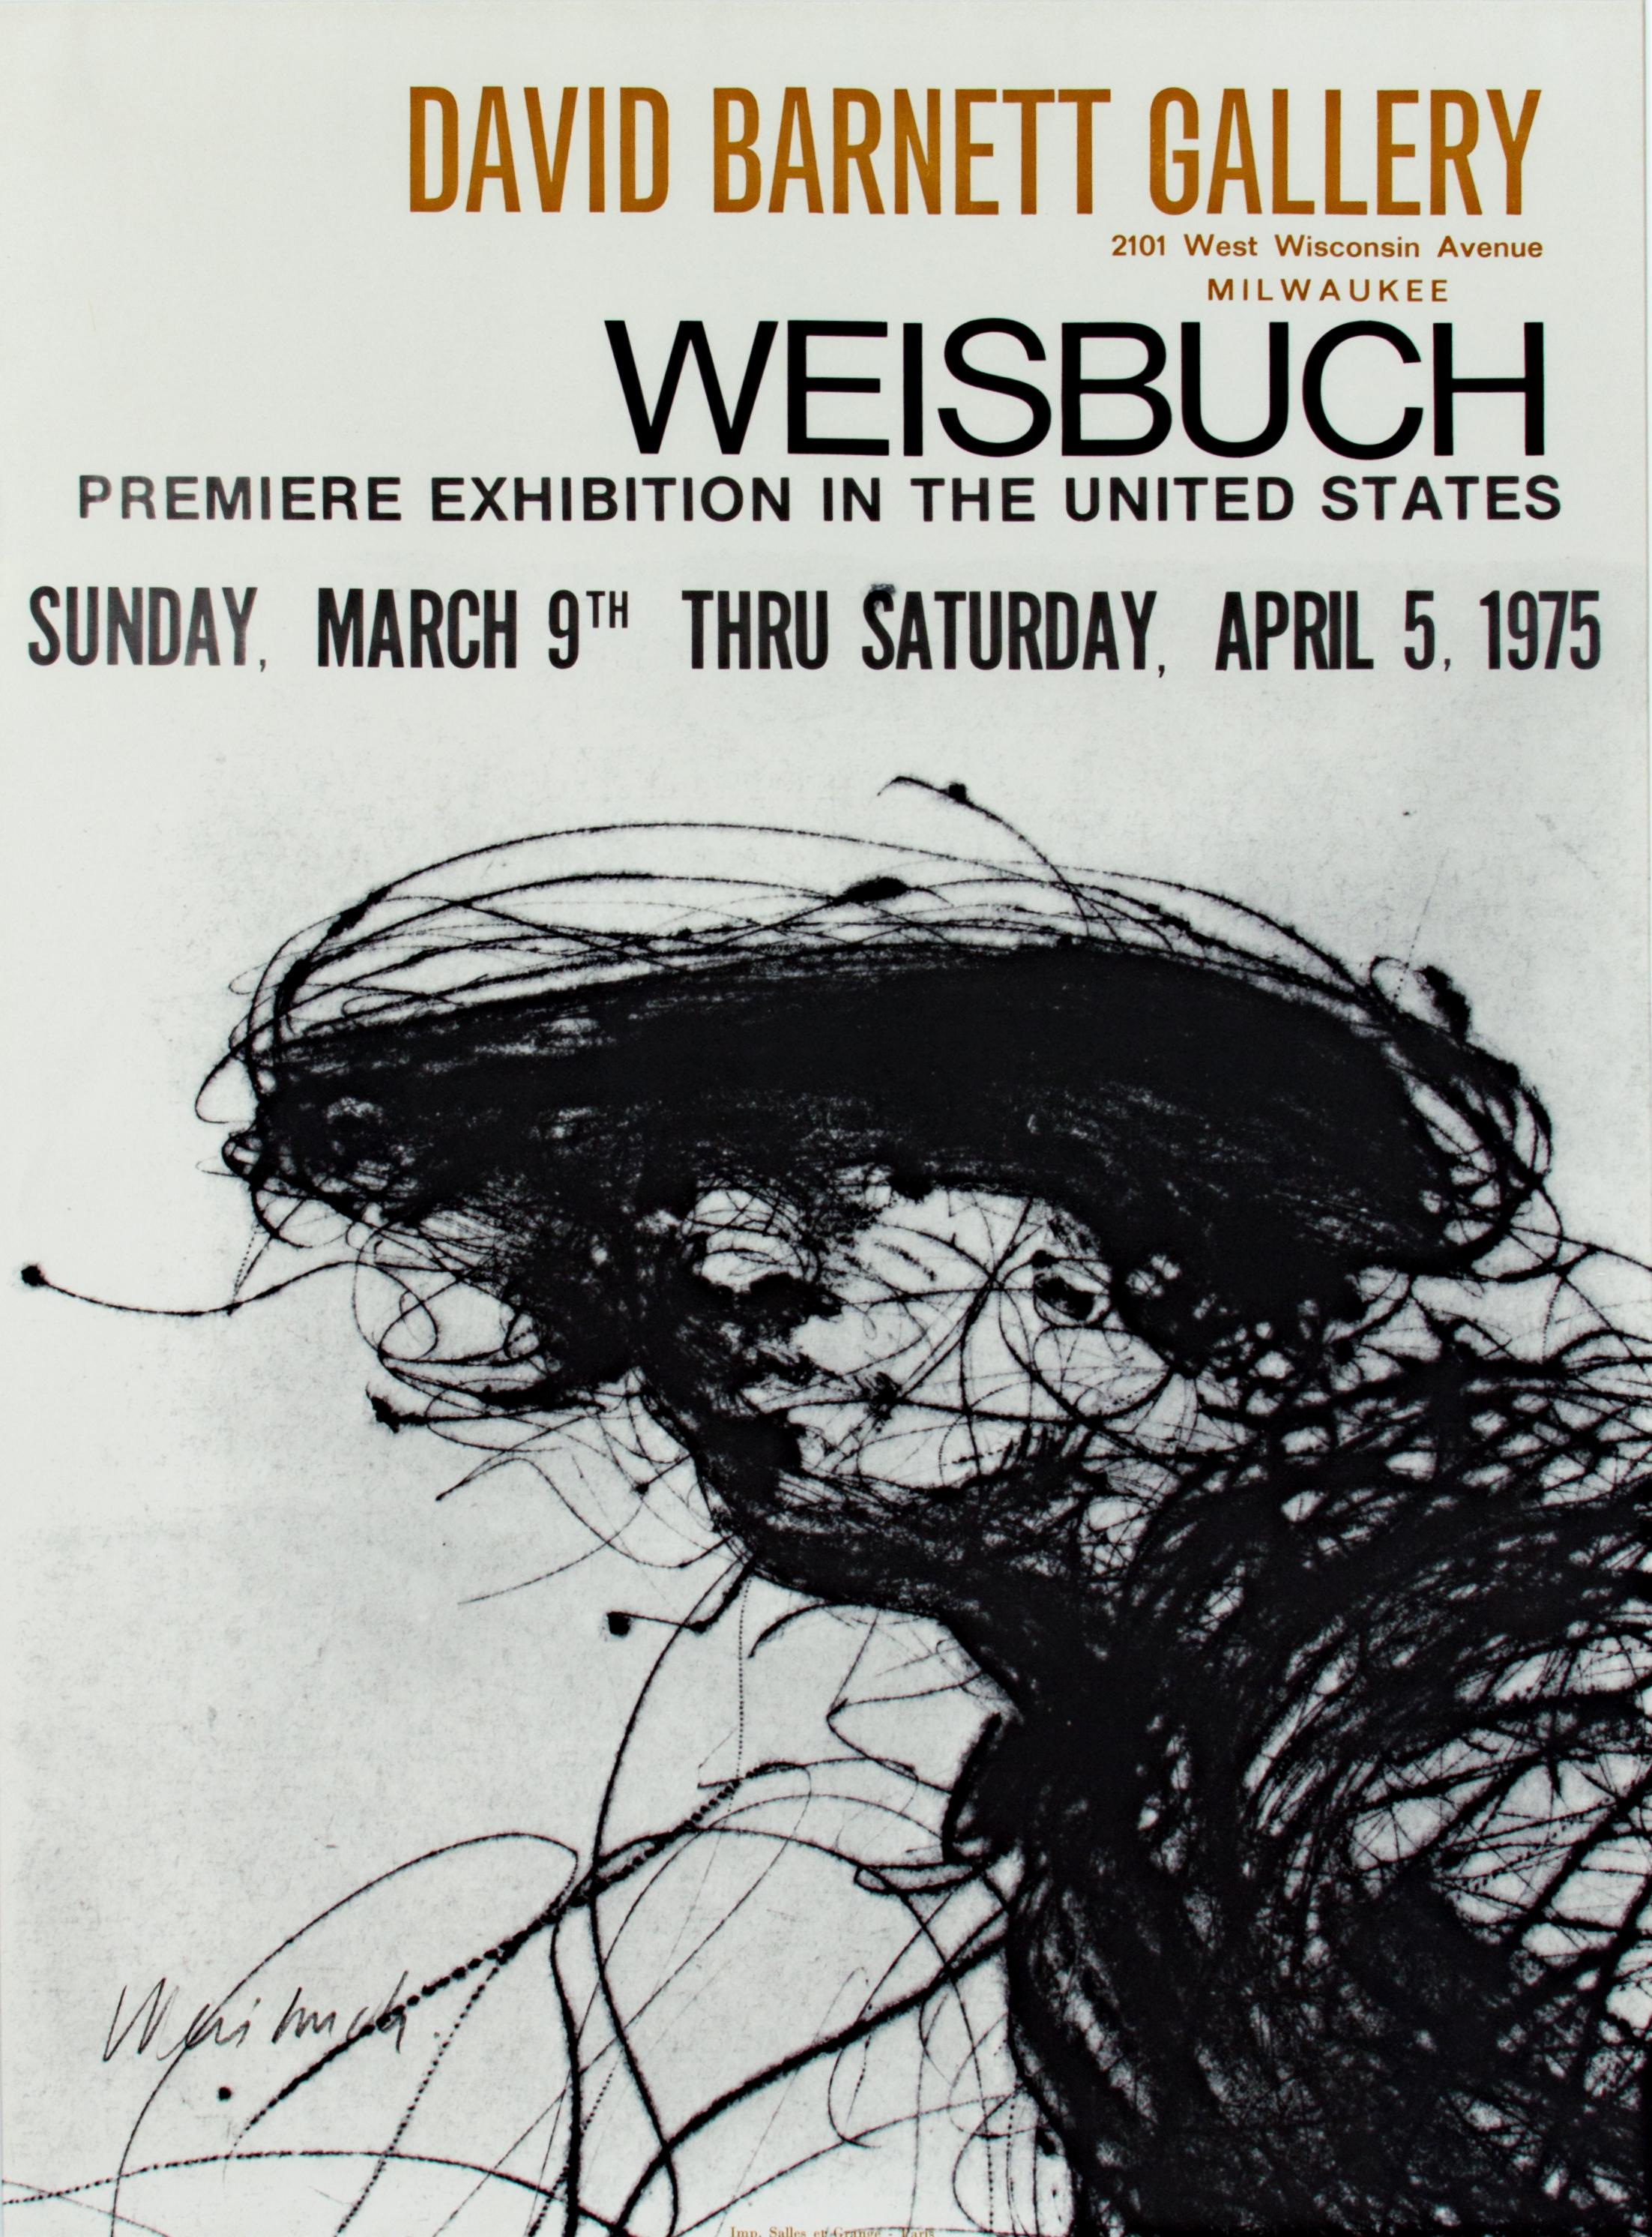 Premiere U.S. Exhibition Poster at David Barnett Gallery, signed by Weisbuch - Print by Claude Weisbuch